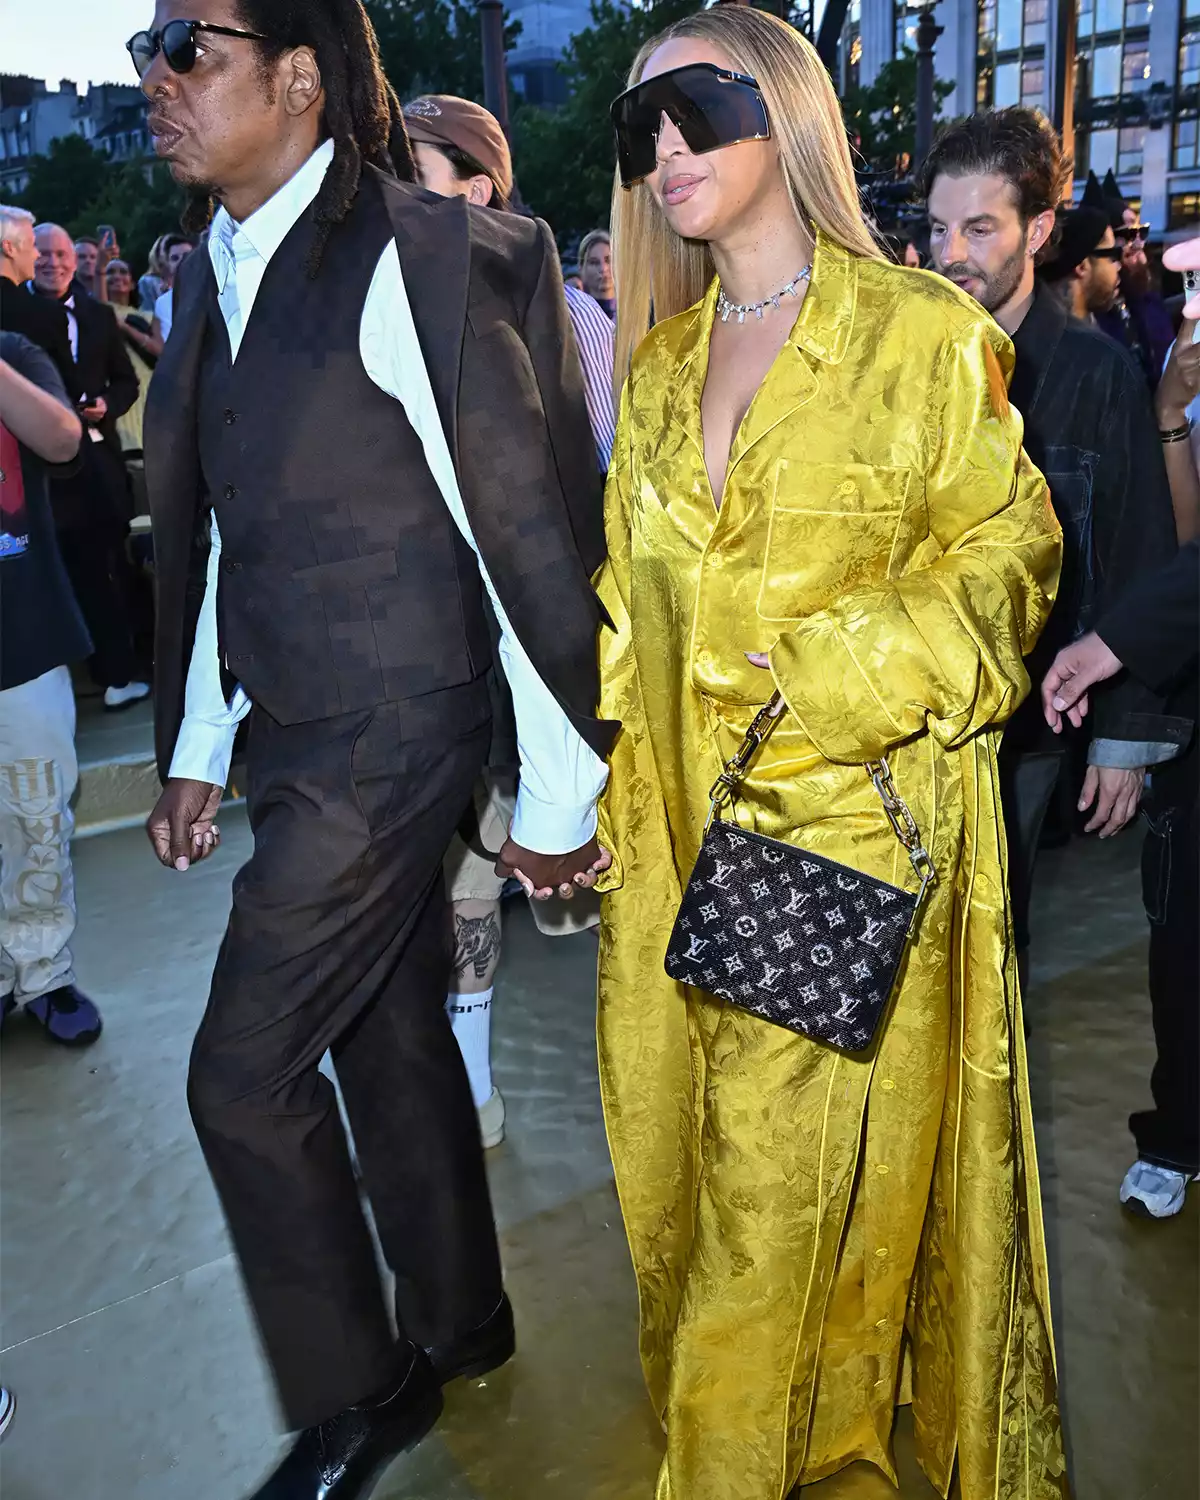 Beyonce wearing a yellow pant suit and holding Jay Z's hand